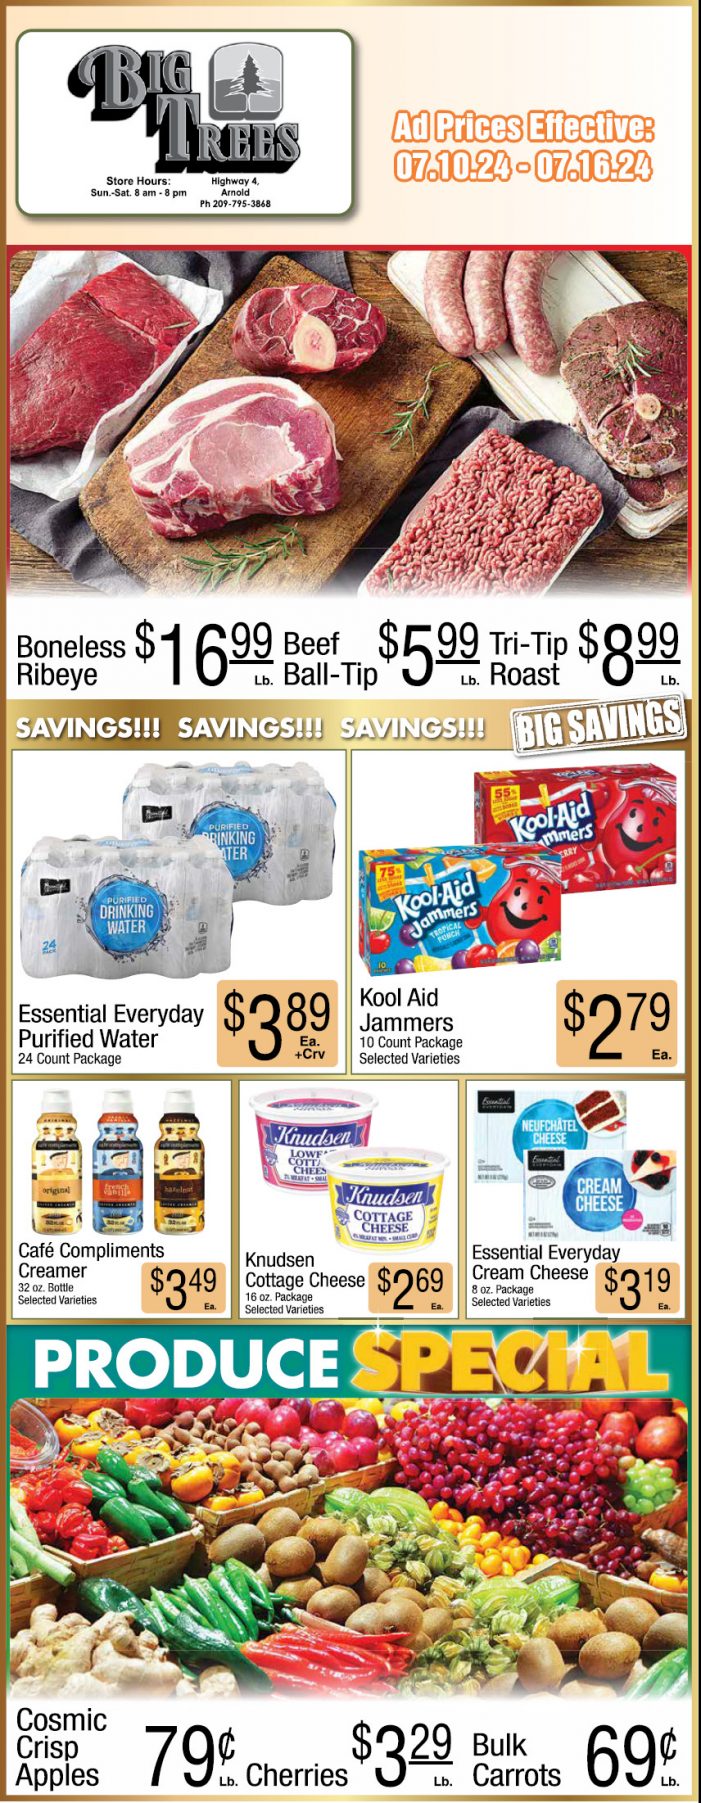 Big Trees Market Weekly Ad, Grocery, Produce, Meat & Deli Specials Through July 16th! Shop Local & Save!